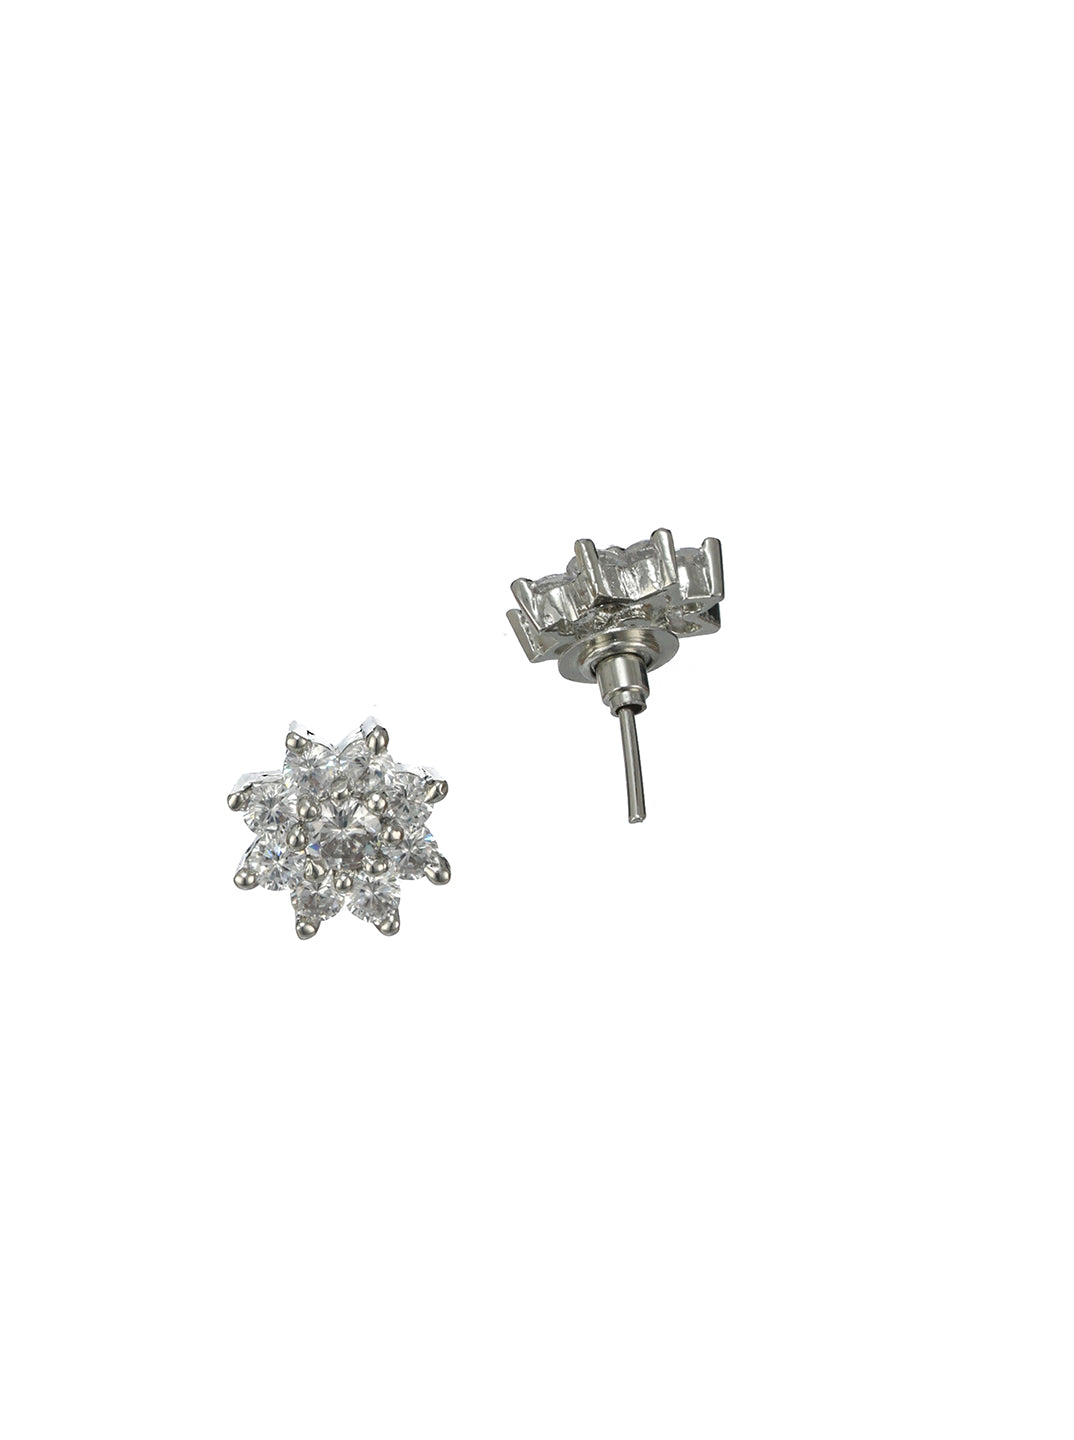 Floral American Diamond Silver-Plated Earrings